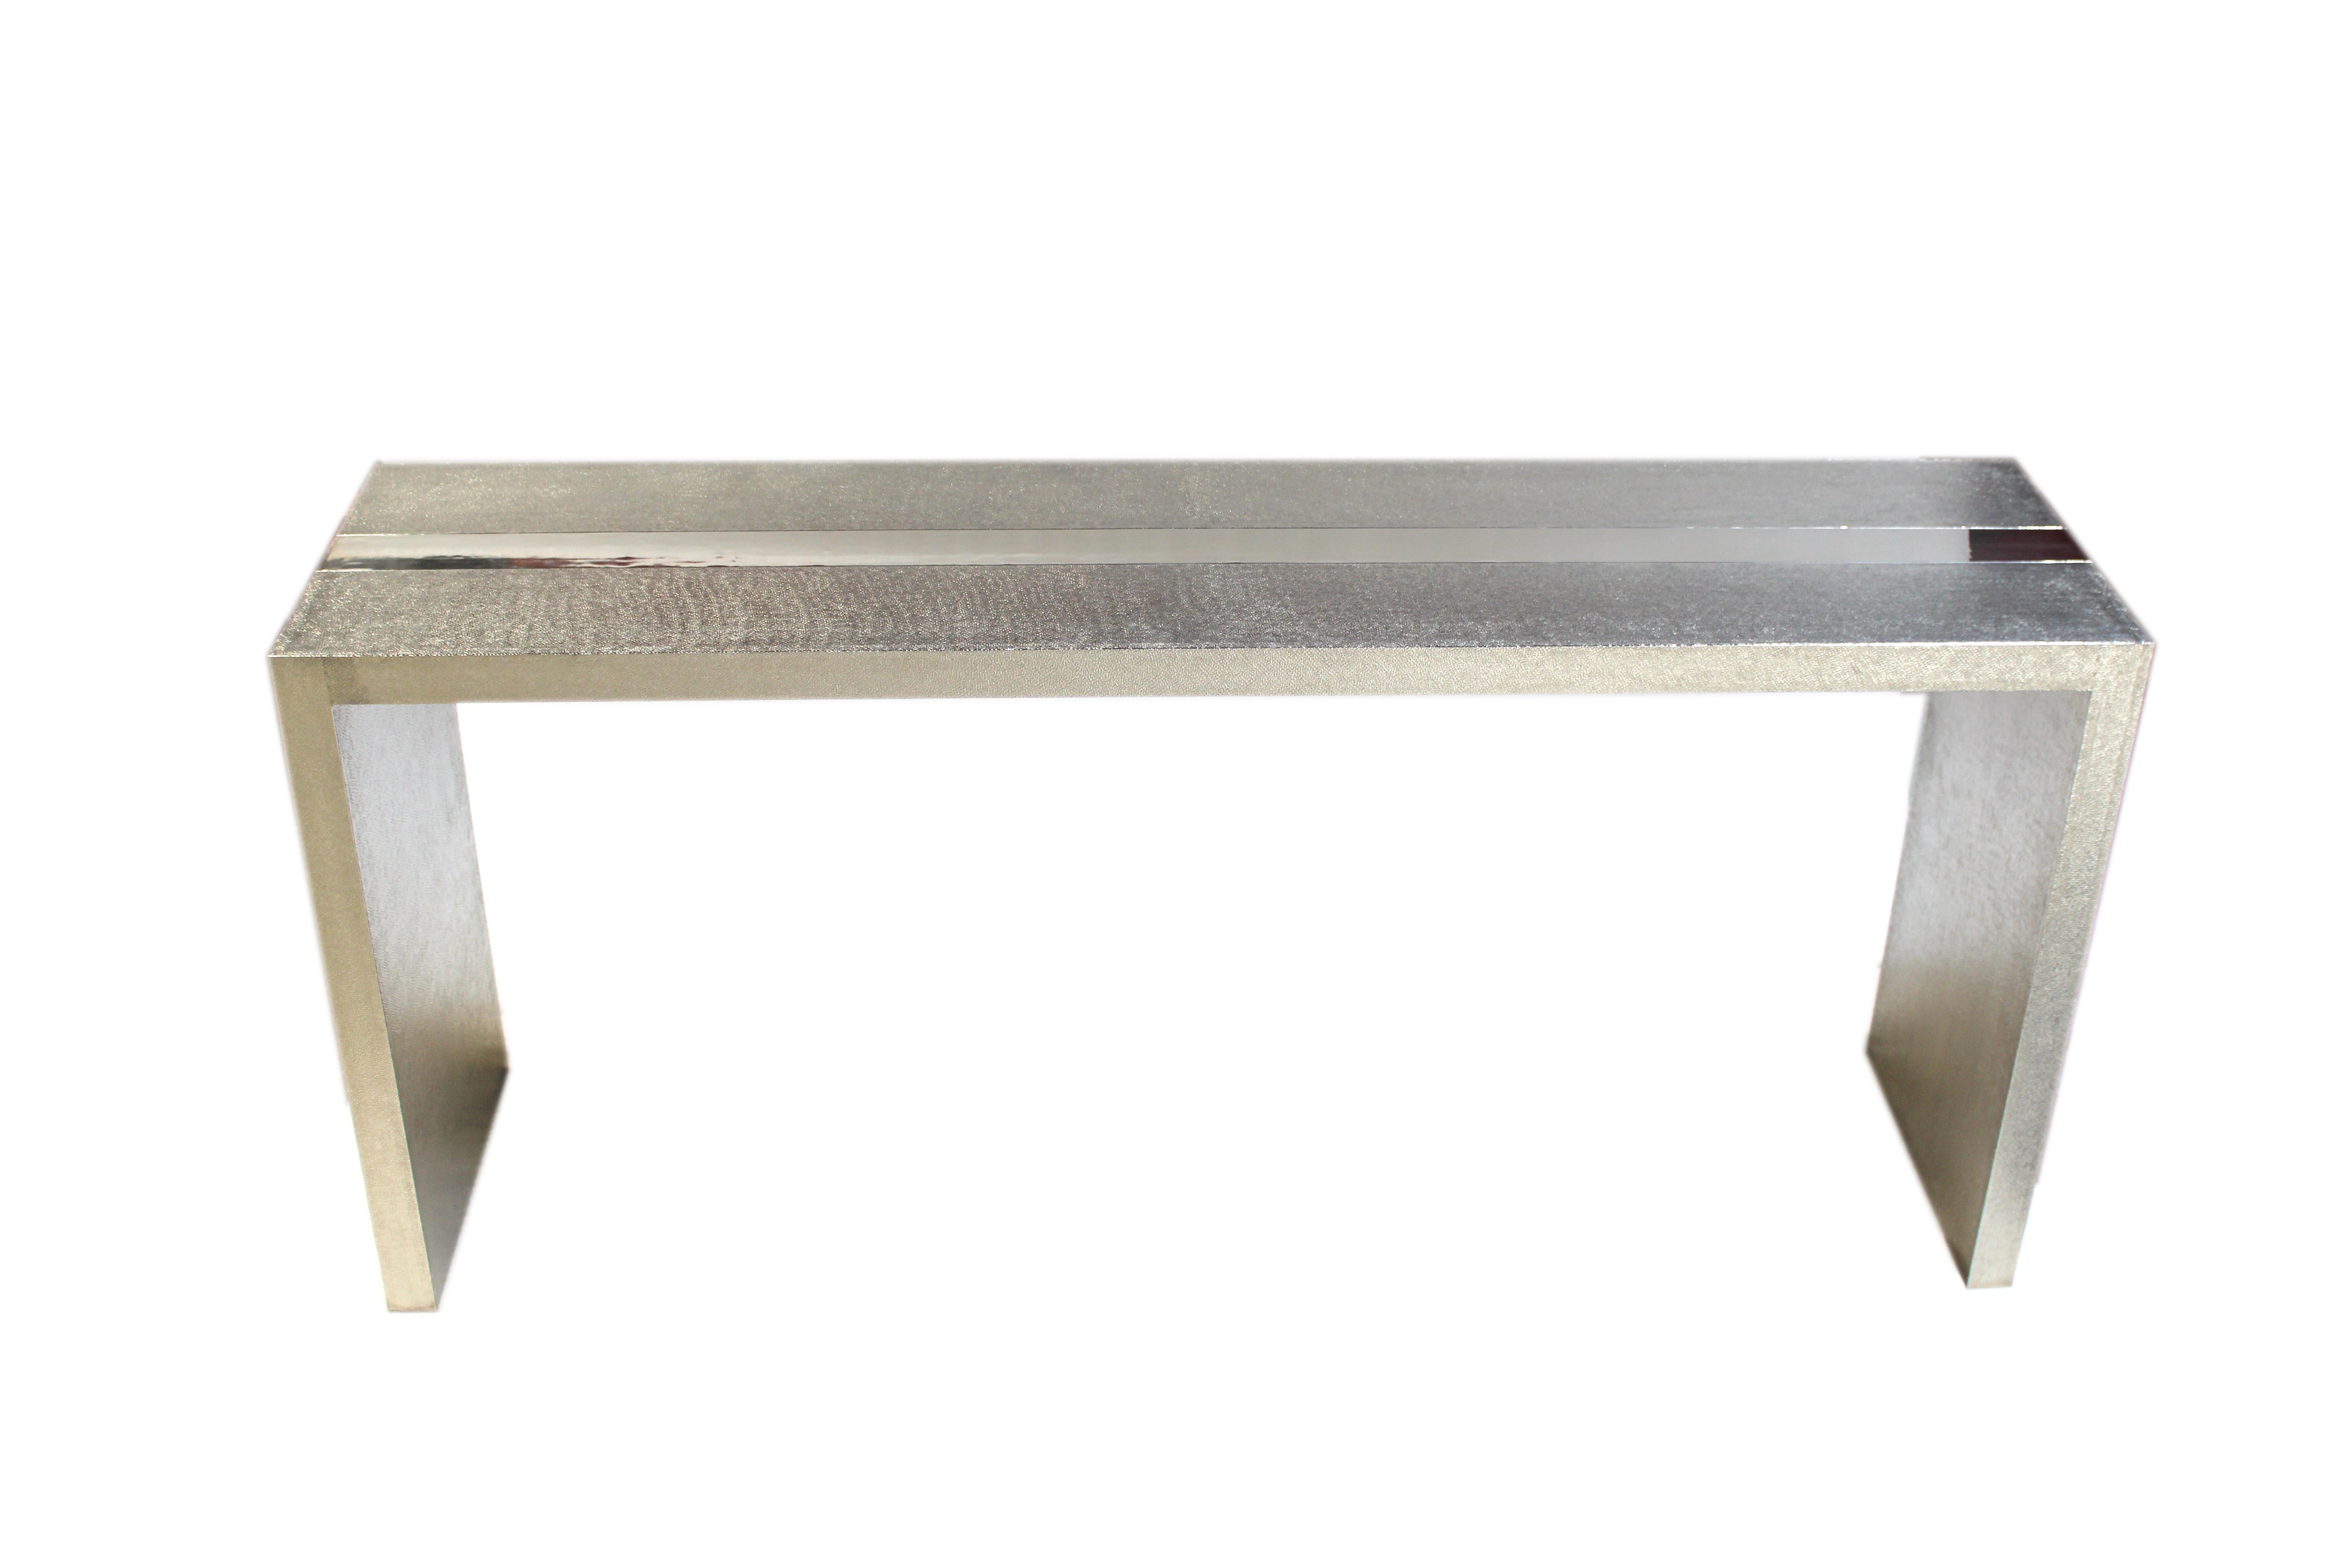 Art Deco Game Tables Rectangular Console in Smooth White Bronze by Alison Spear For Sale 7